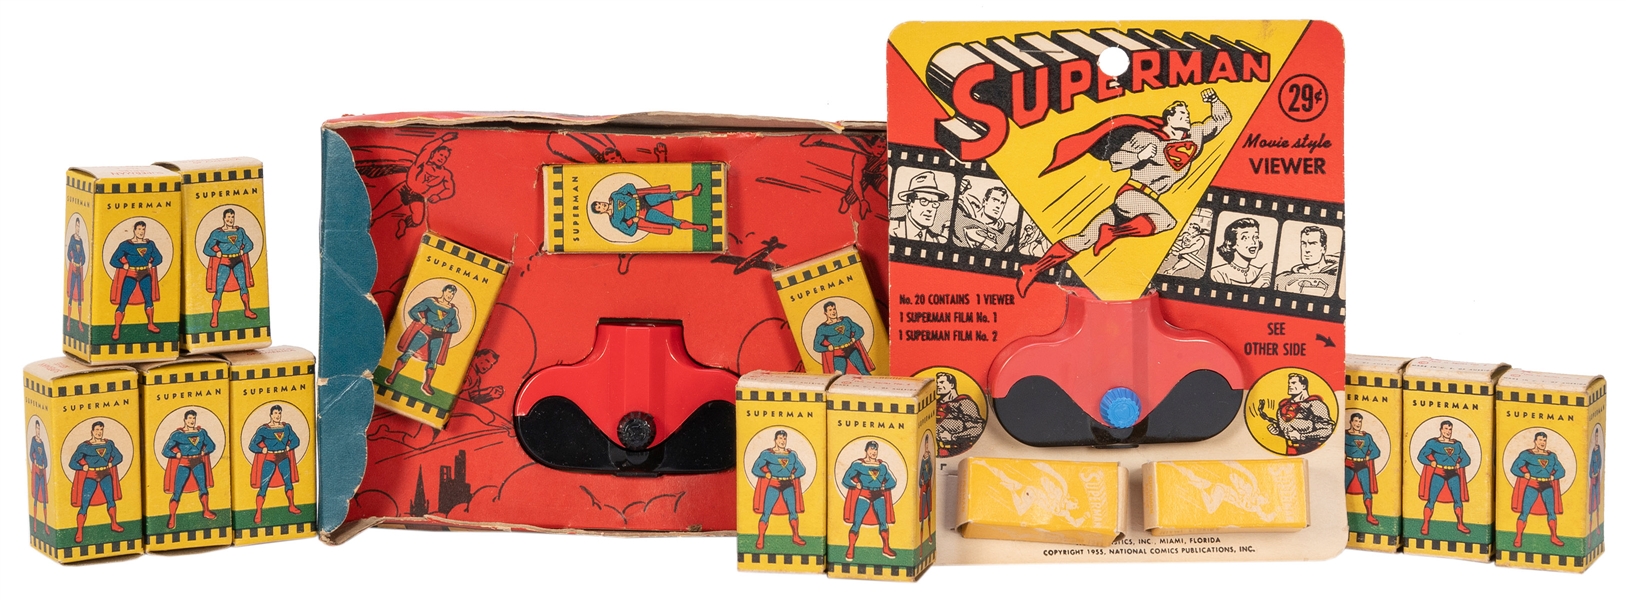  Superman Acme Viewers and Films Collection. USA, 1940s/50s....